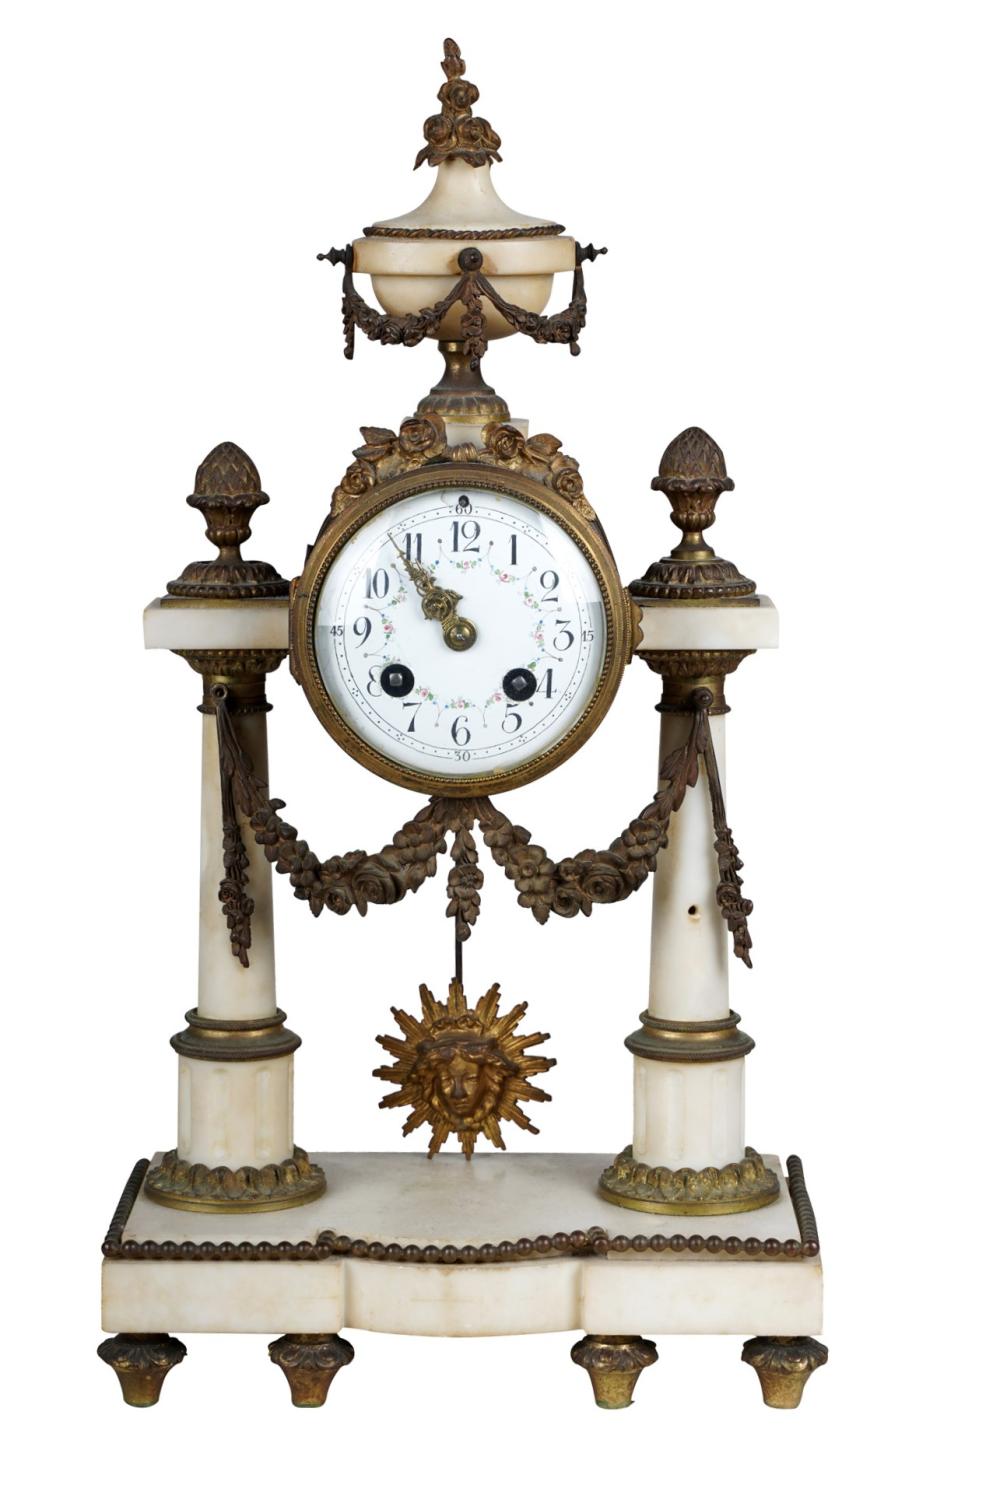 ONYX MANTLE CLOCK19th century apparently 336166